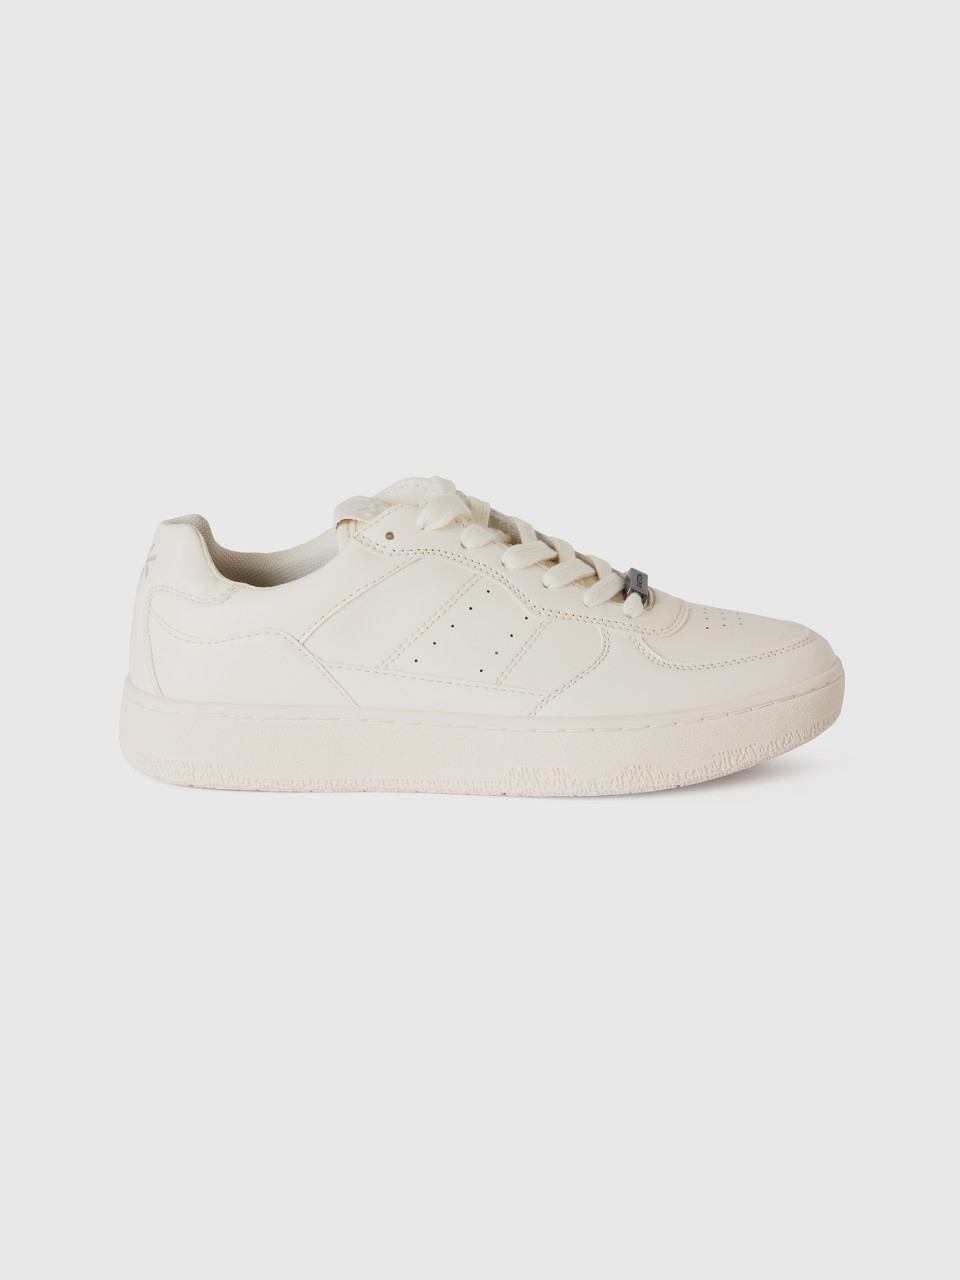 Benetton, Suede-look Low-top Sneakers,5-7, Creamy White